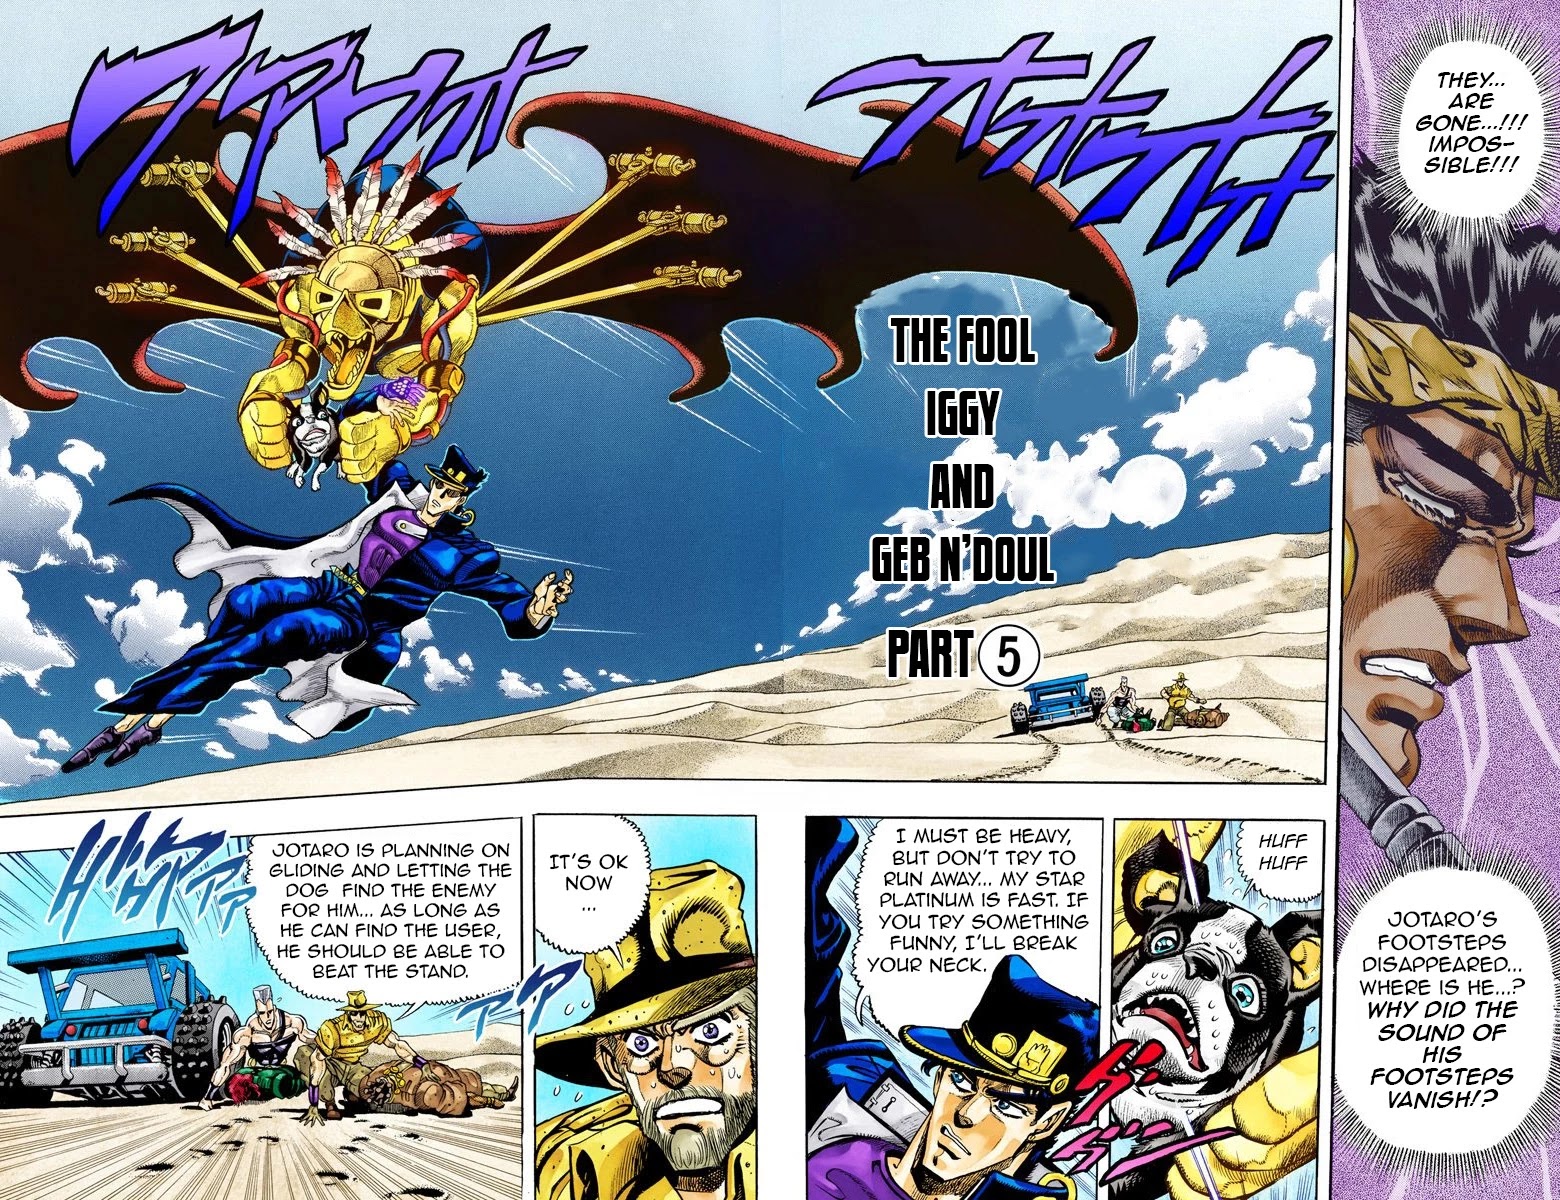 Oingo Boingo Brothers Adventure Chapter 74: 'the Fool' Iggy And 'geb' N'doul Part 5 - Picture 1